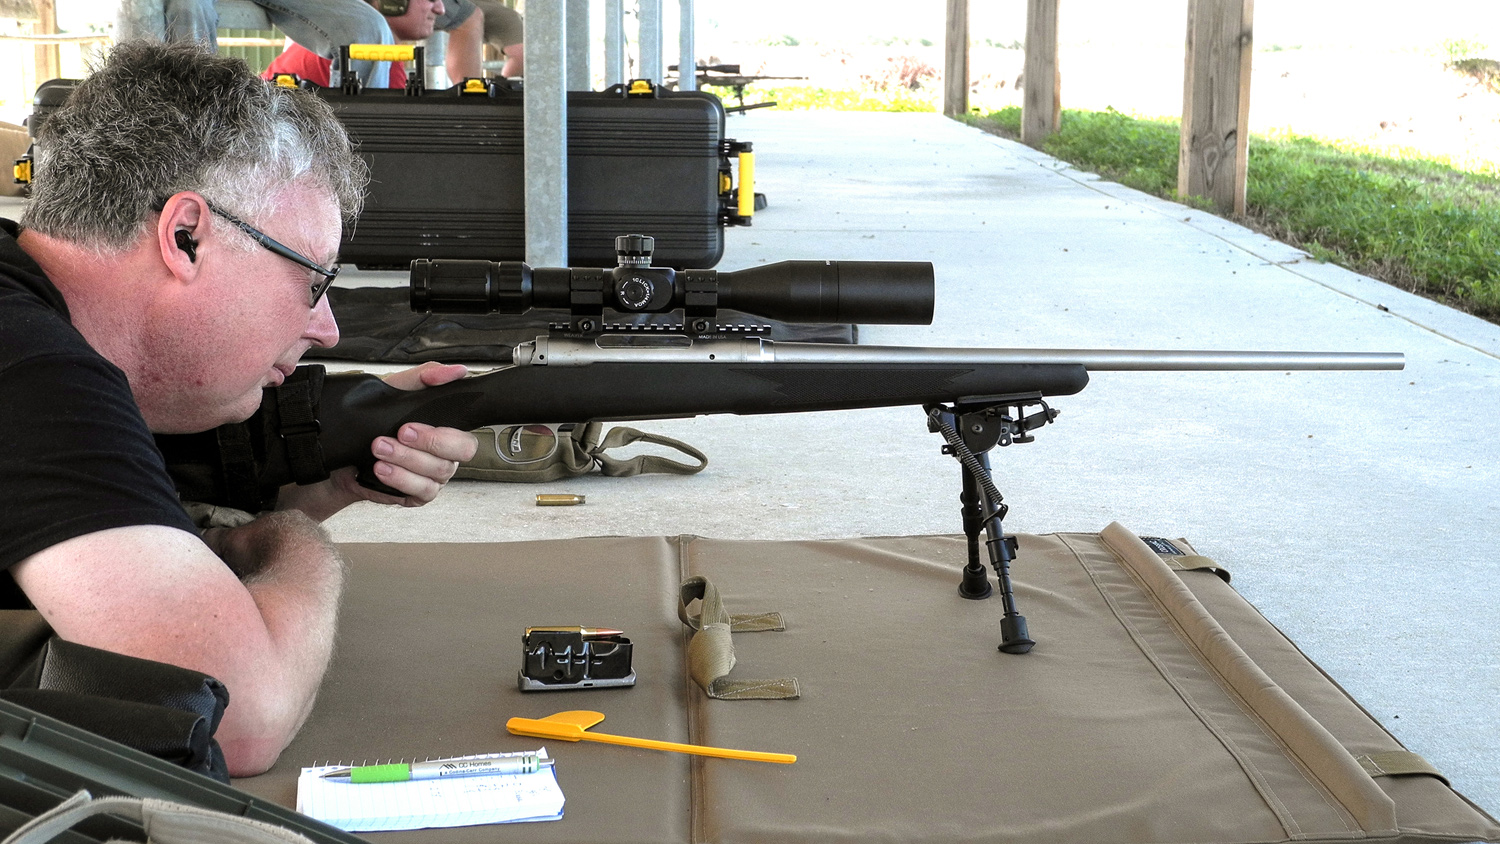 Savage 116 Storm rifle in  .308 Win., topped with a Primary Arms 4-14x44 mm optic.